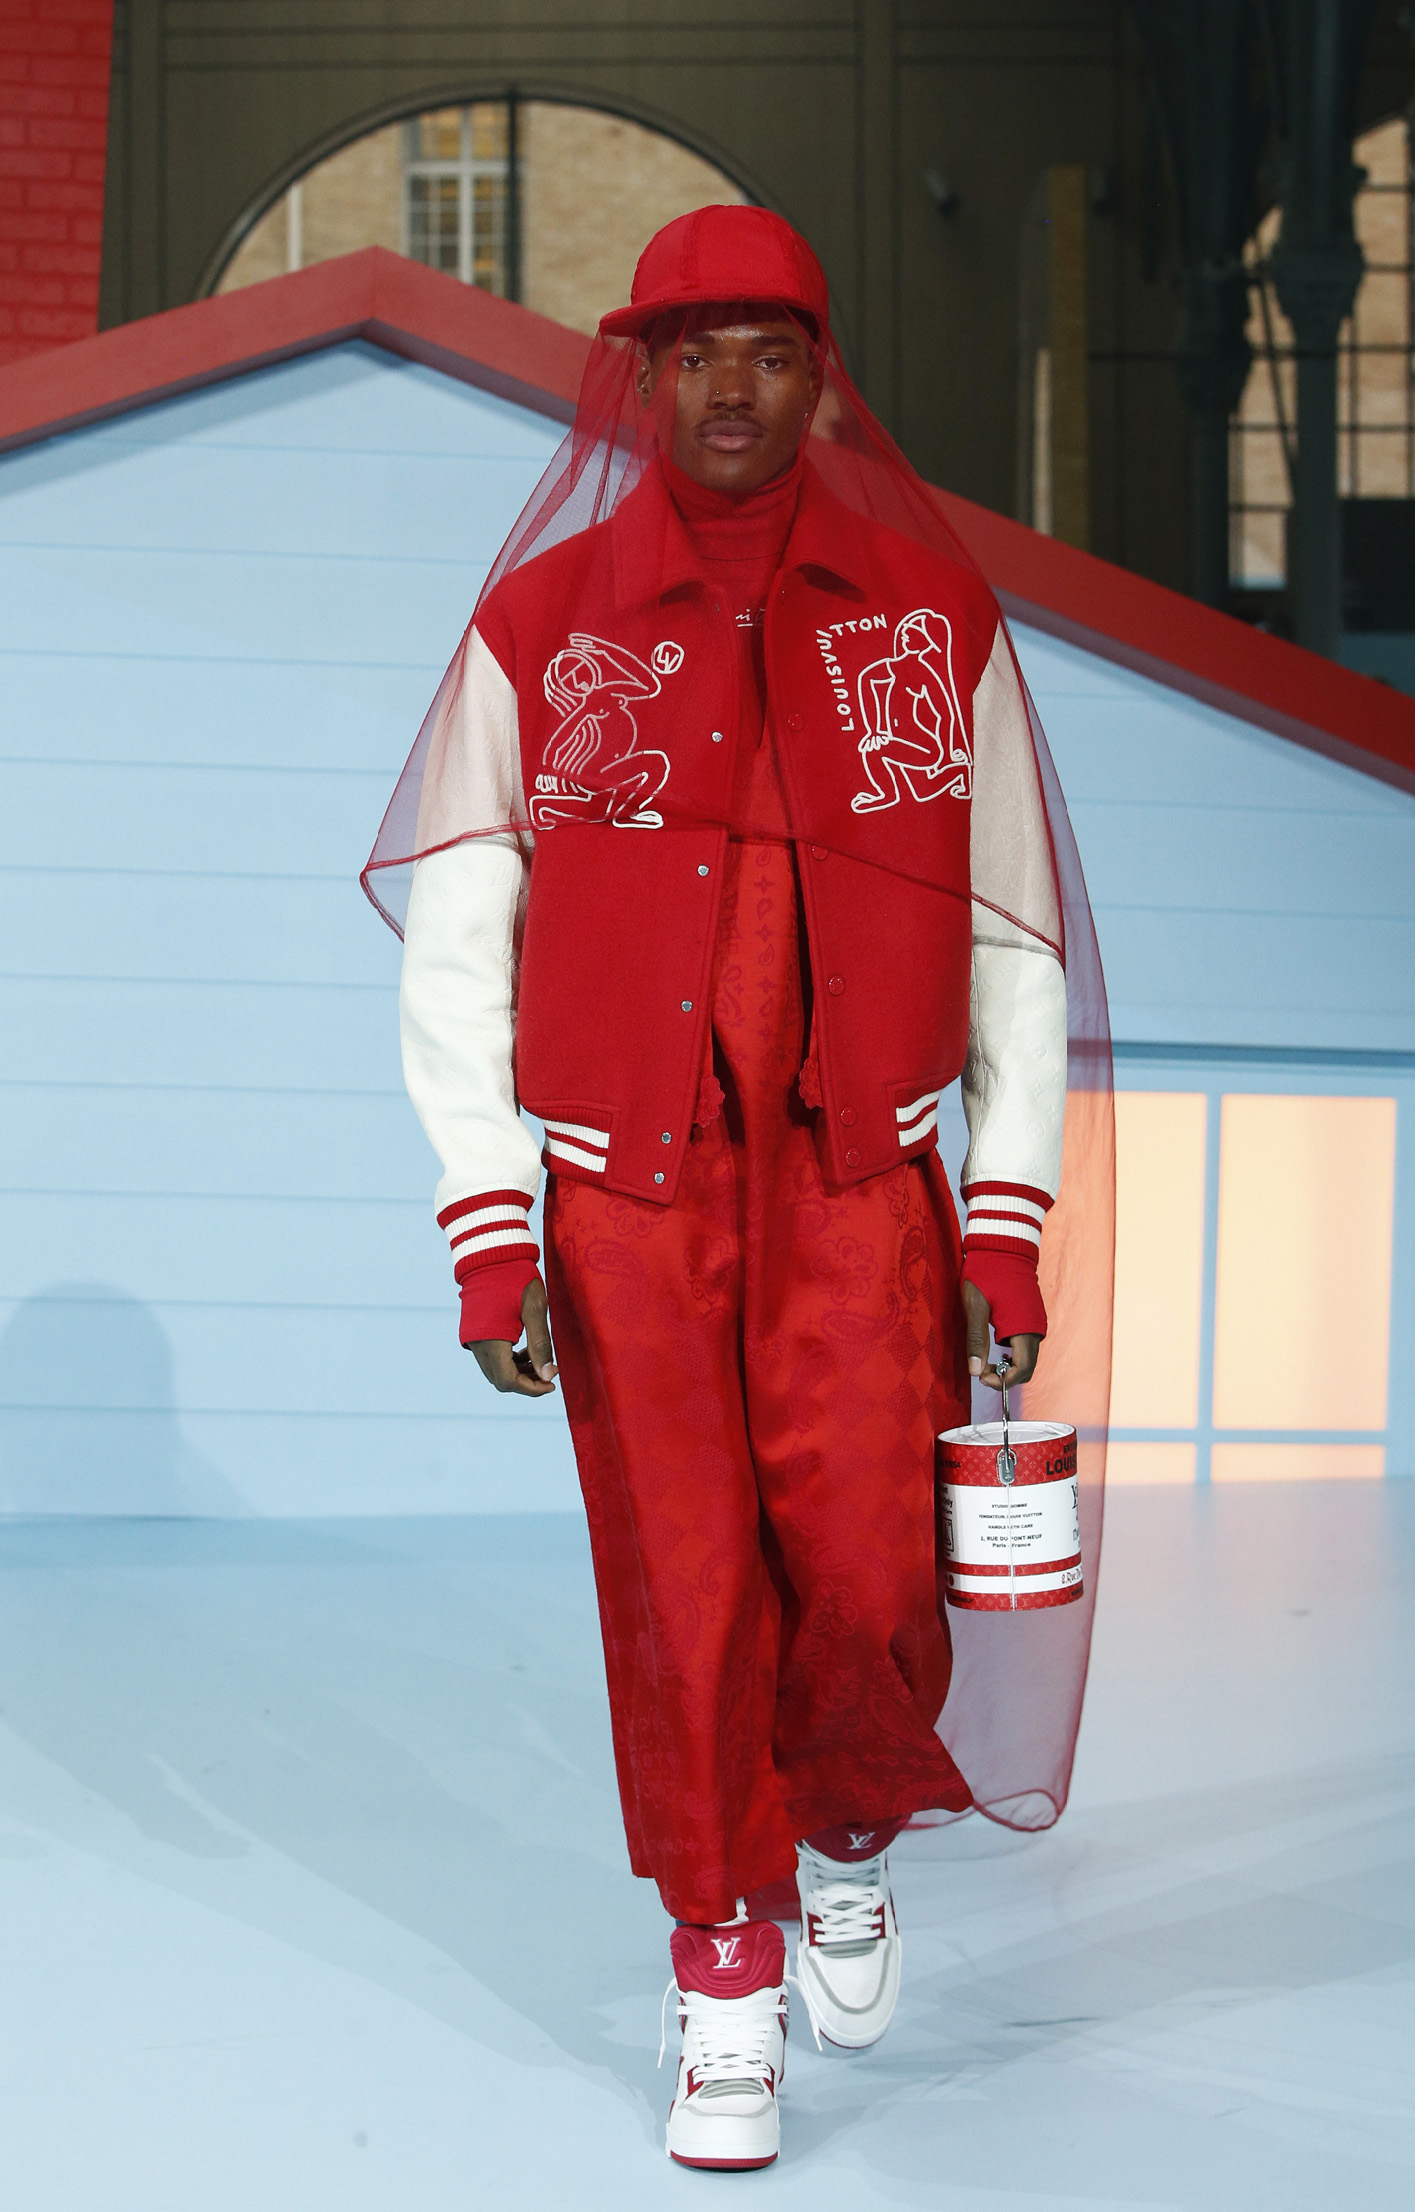 Louis Vuitton on X: #LVMenFW22 Alternative realities. New leather goods  from the next #LouisVuitton Men's Collection by Virgil Abloh revisit  familiar objects in imaginative ways. Watch the fashion show live on  Thursday